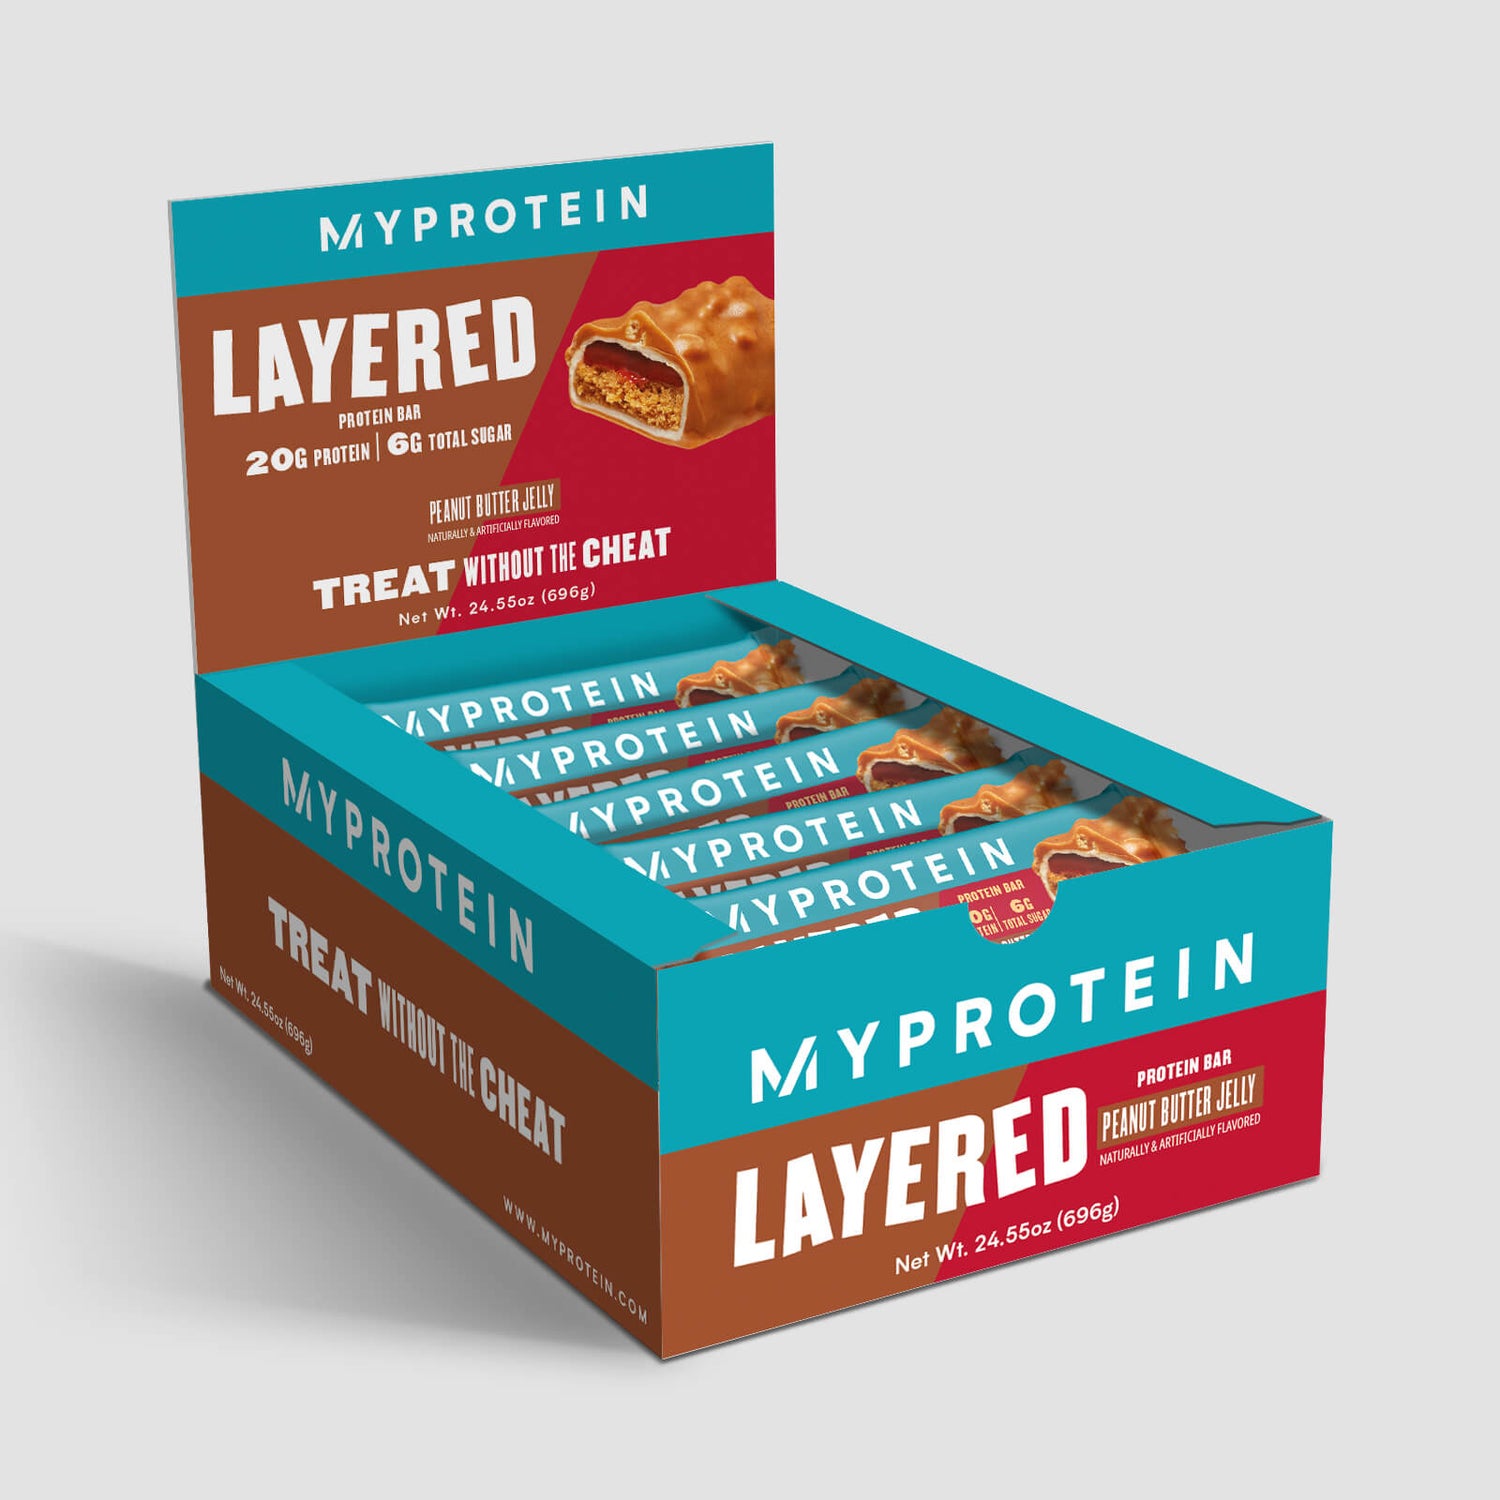 Myprotein Layered Bar (USA) - Peanut Butter And Jelly